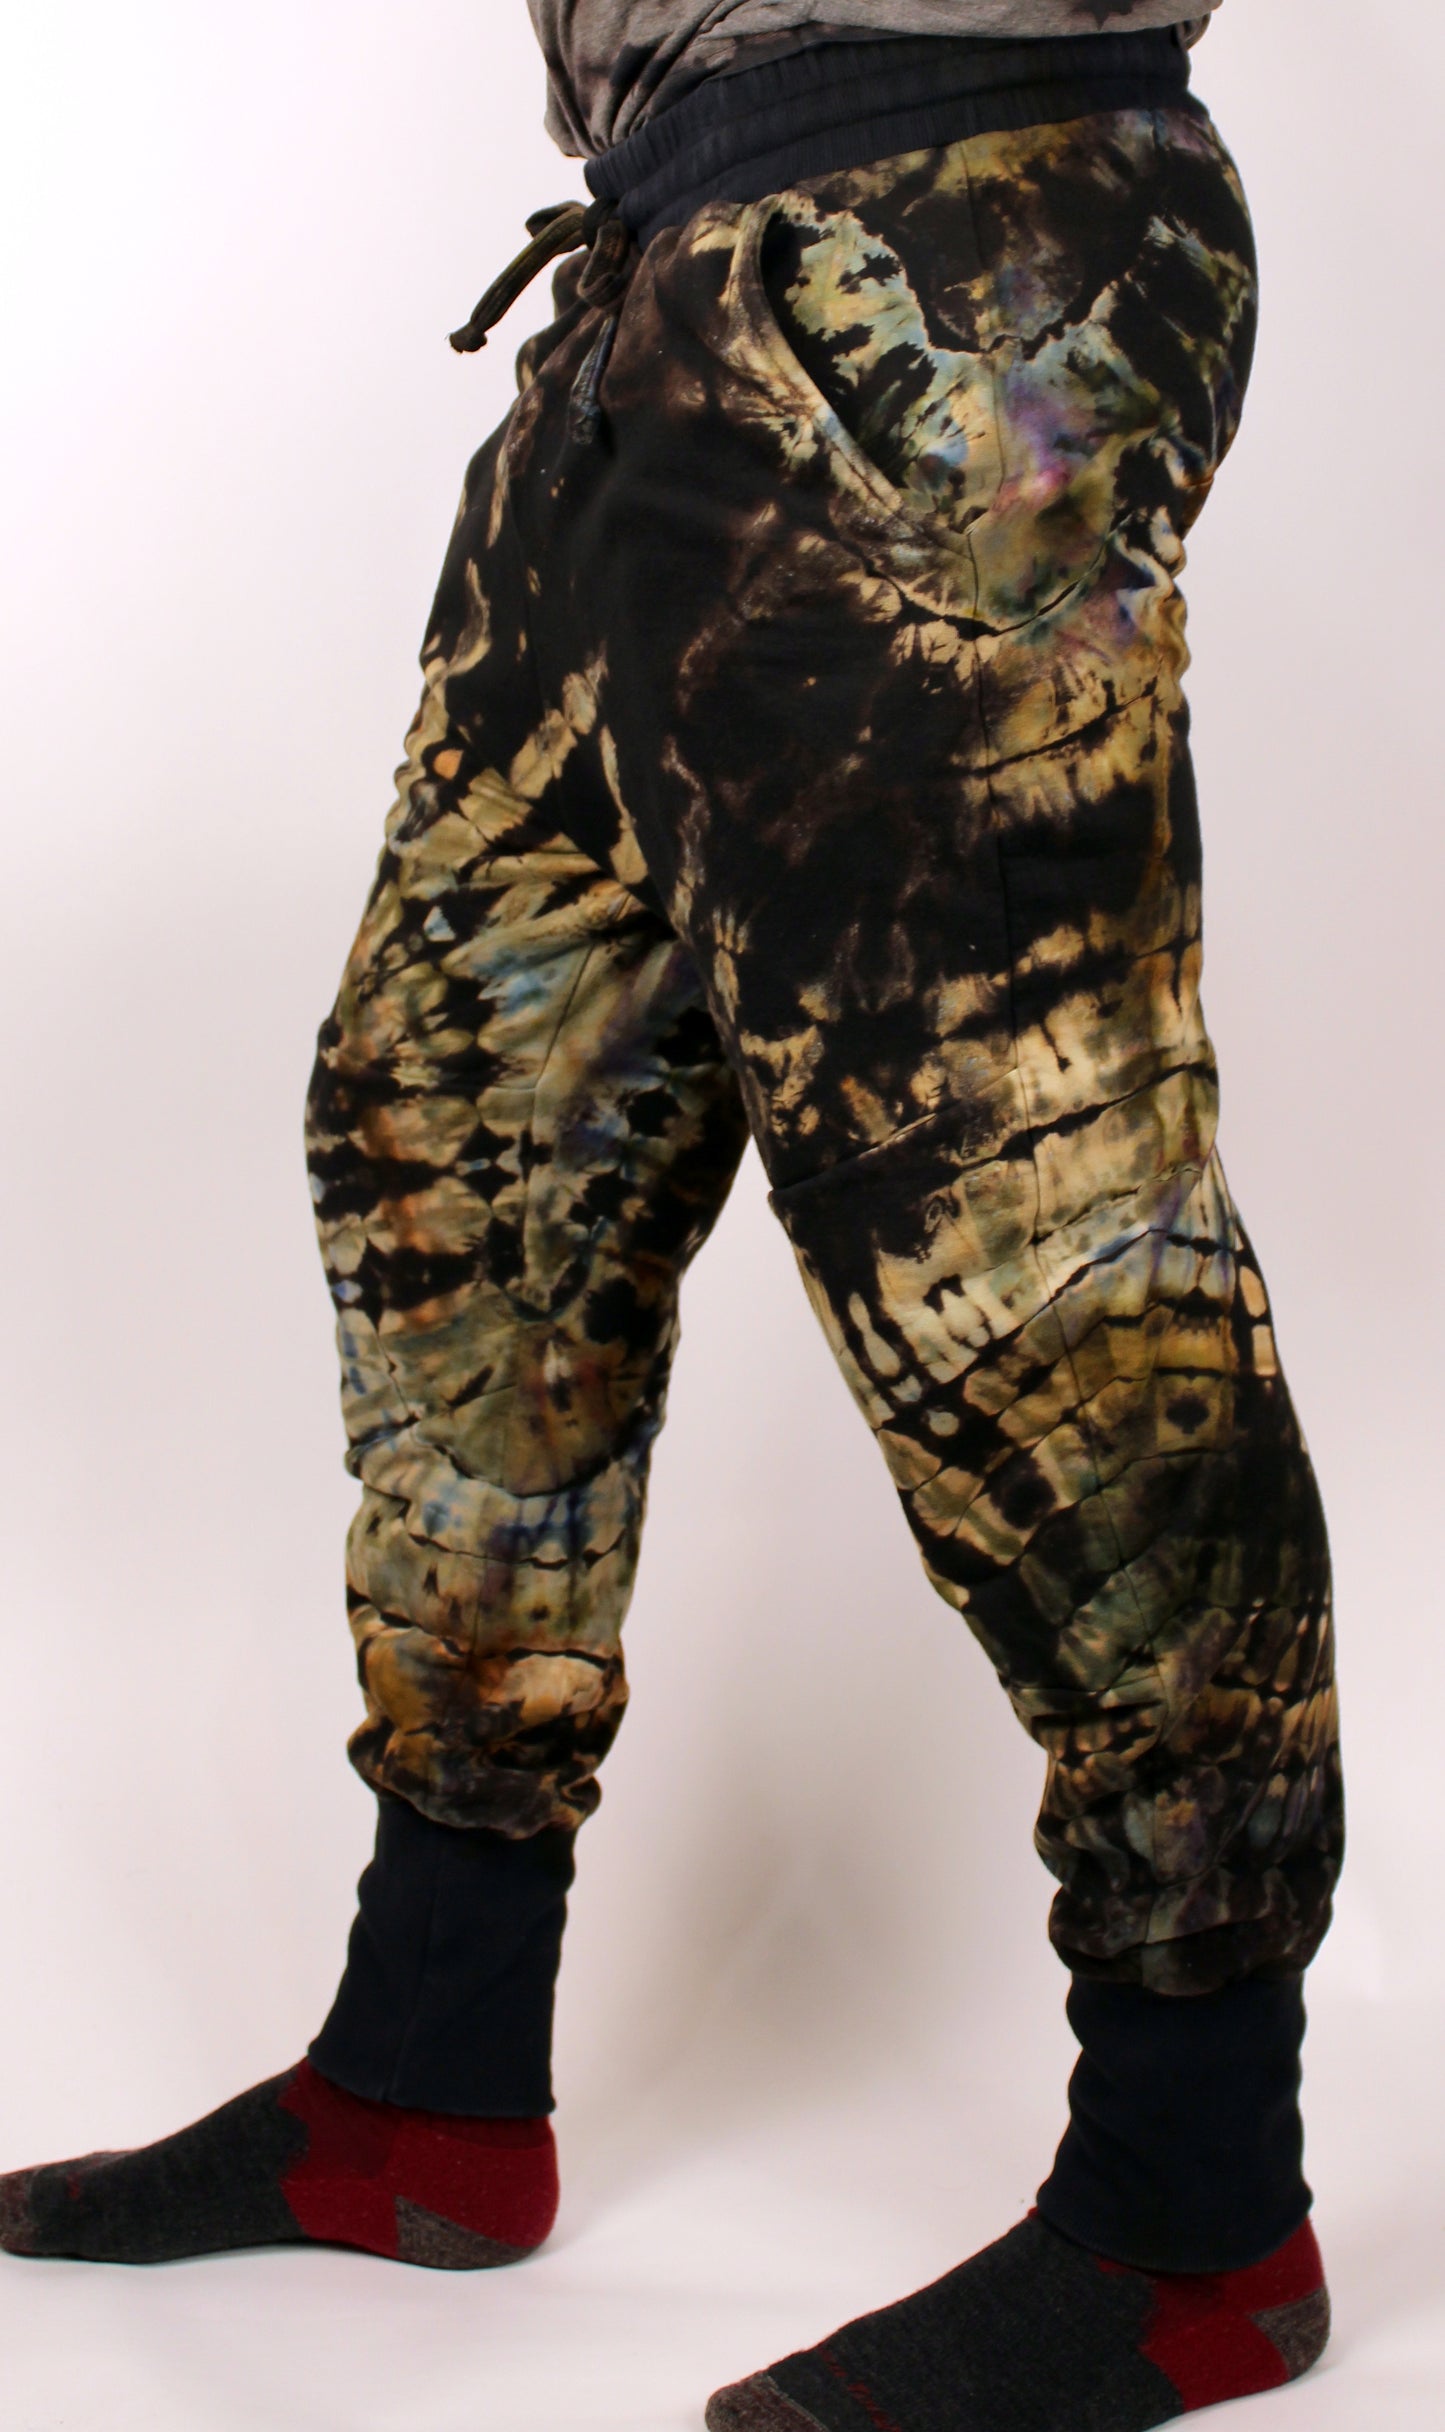 M - "Fossilized" Joggers